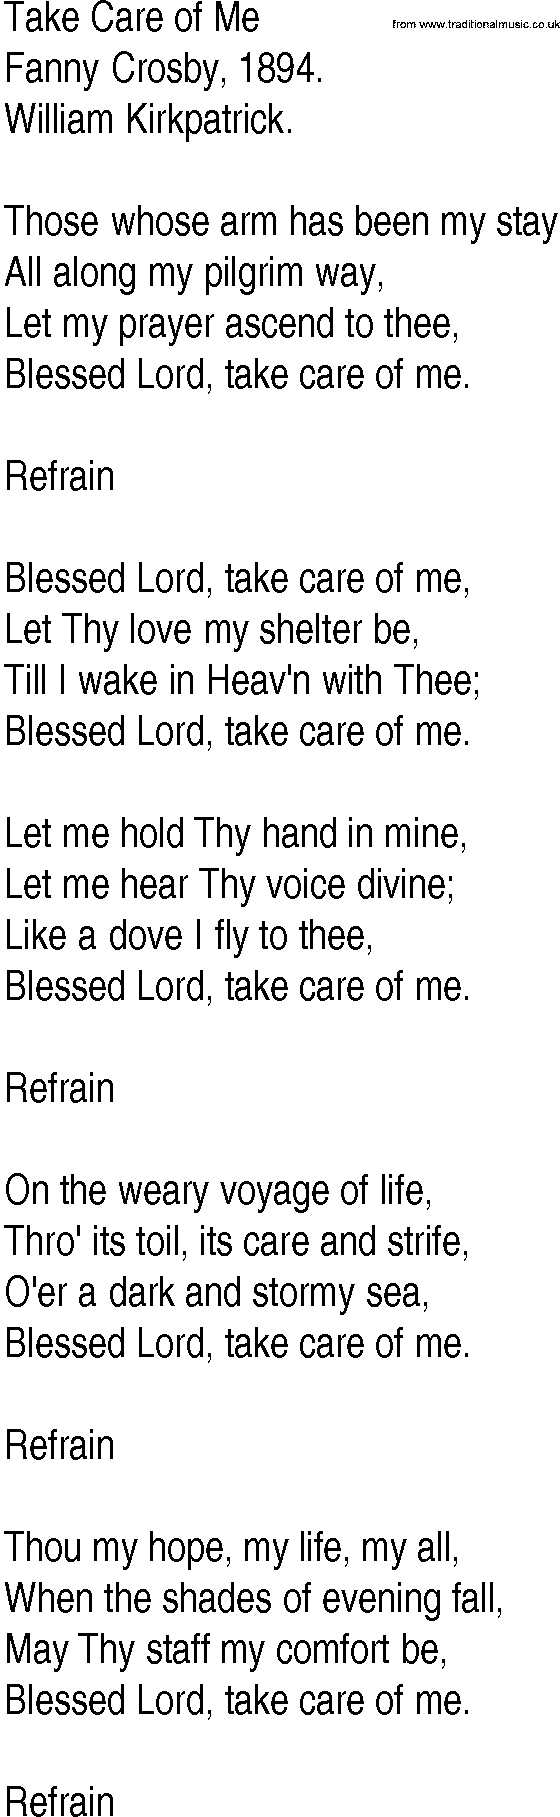 Hymn and Gospel Song: Take Care of Me by Fanny Crosby lyrics